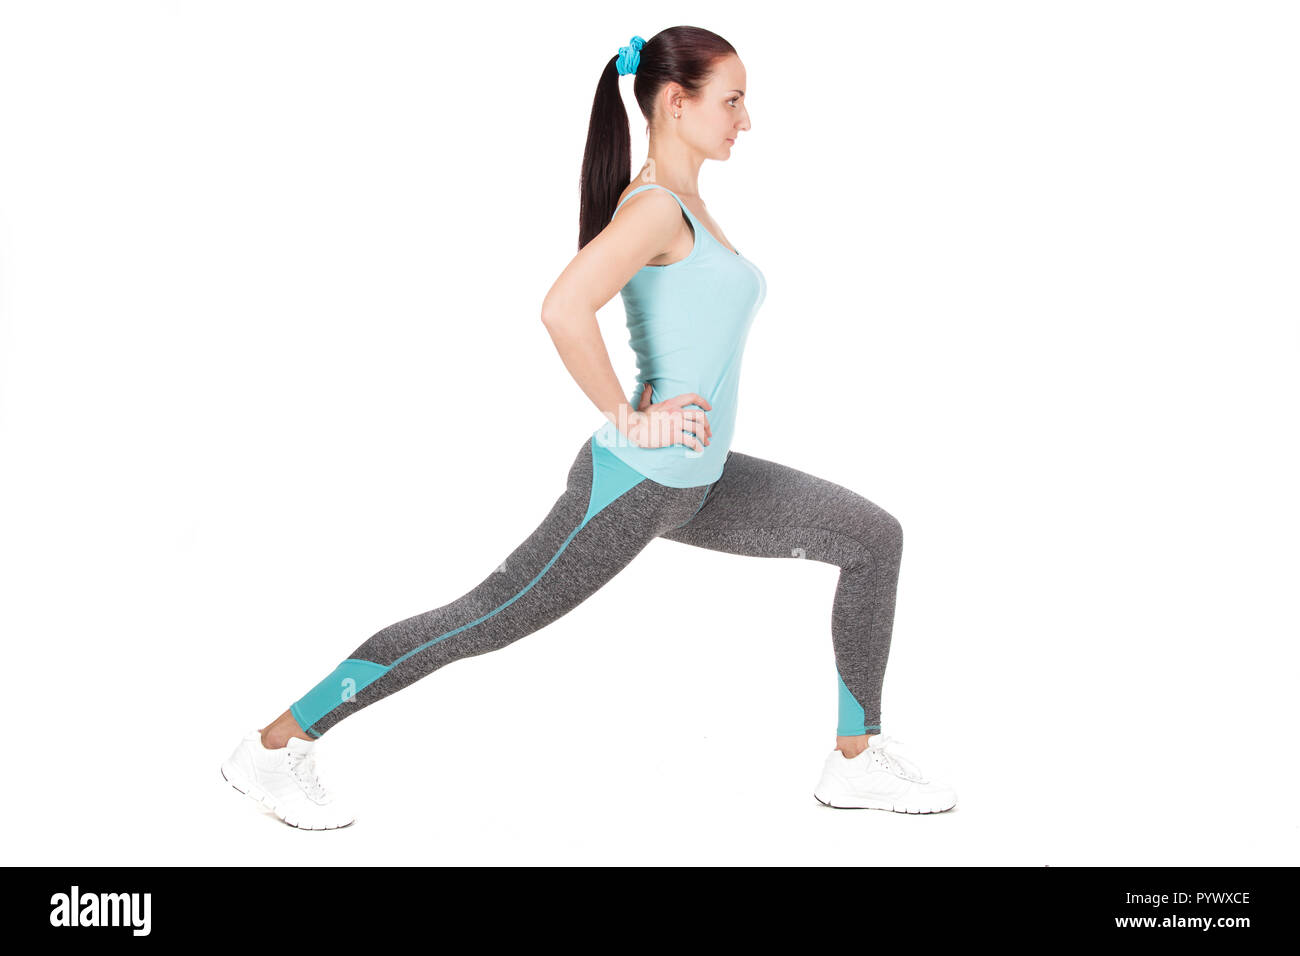 Fitness sports woman exercise Stock Photo